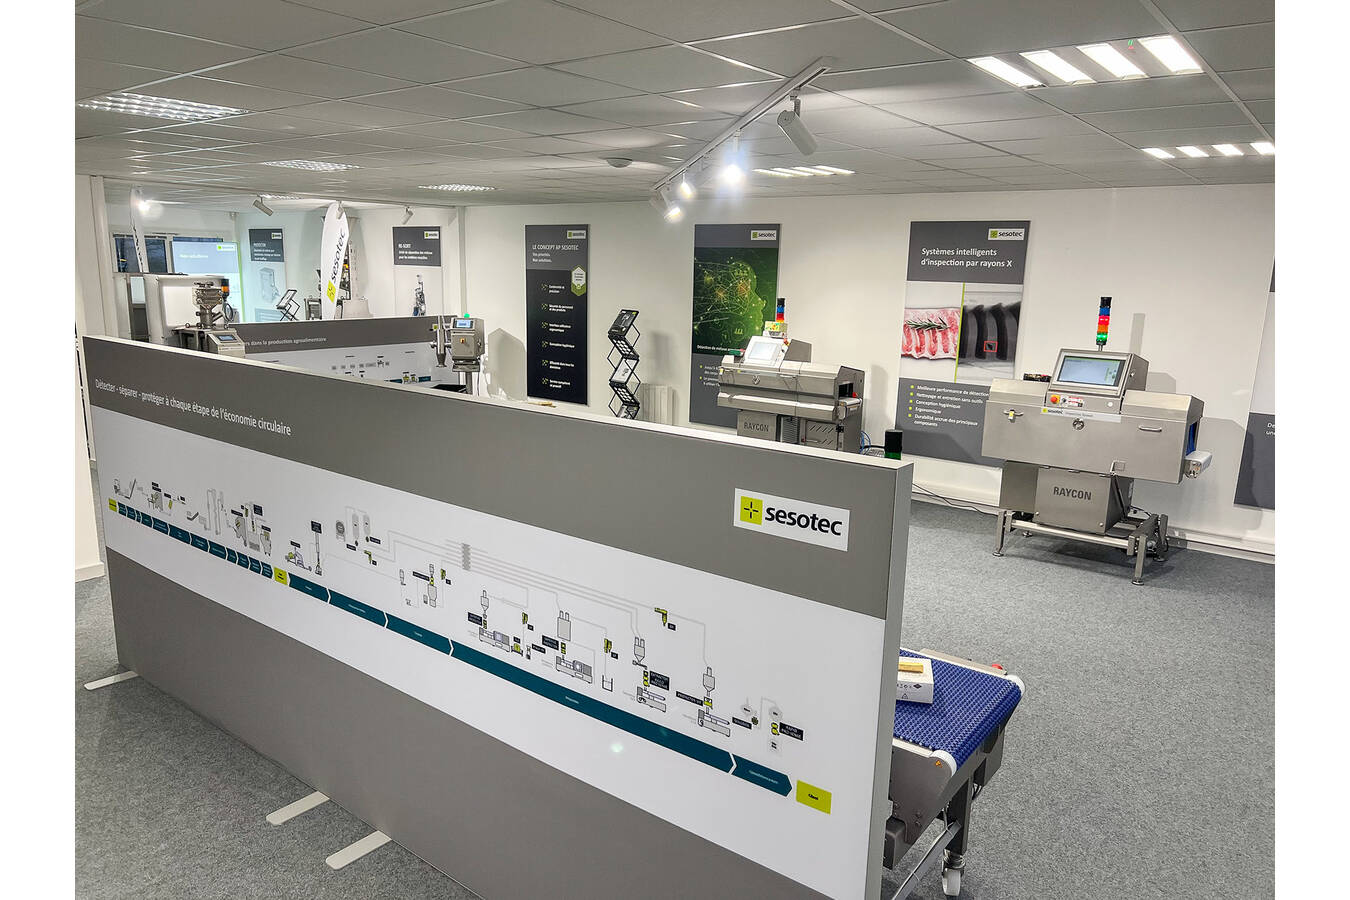 Foreign object detectors and product inspection equipment are available for testing and training at Sesotec’s new showroom at 1 Rue du Chêne Morand, 35510 CESSON SEVIGNE (Photo: Sesotec GmbH)